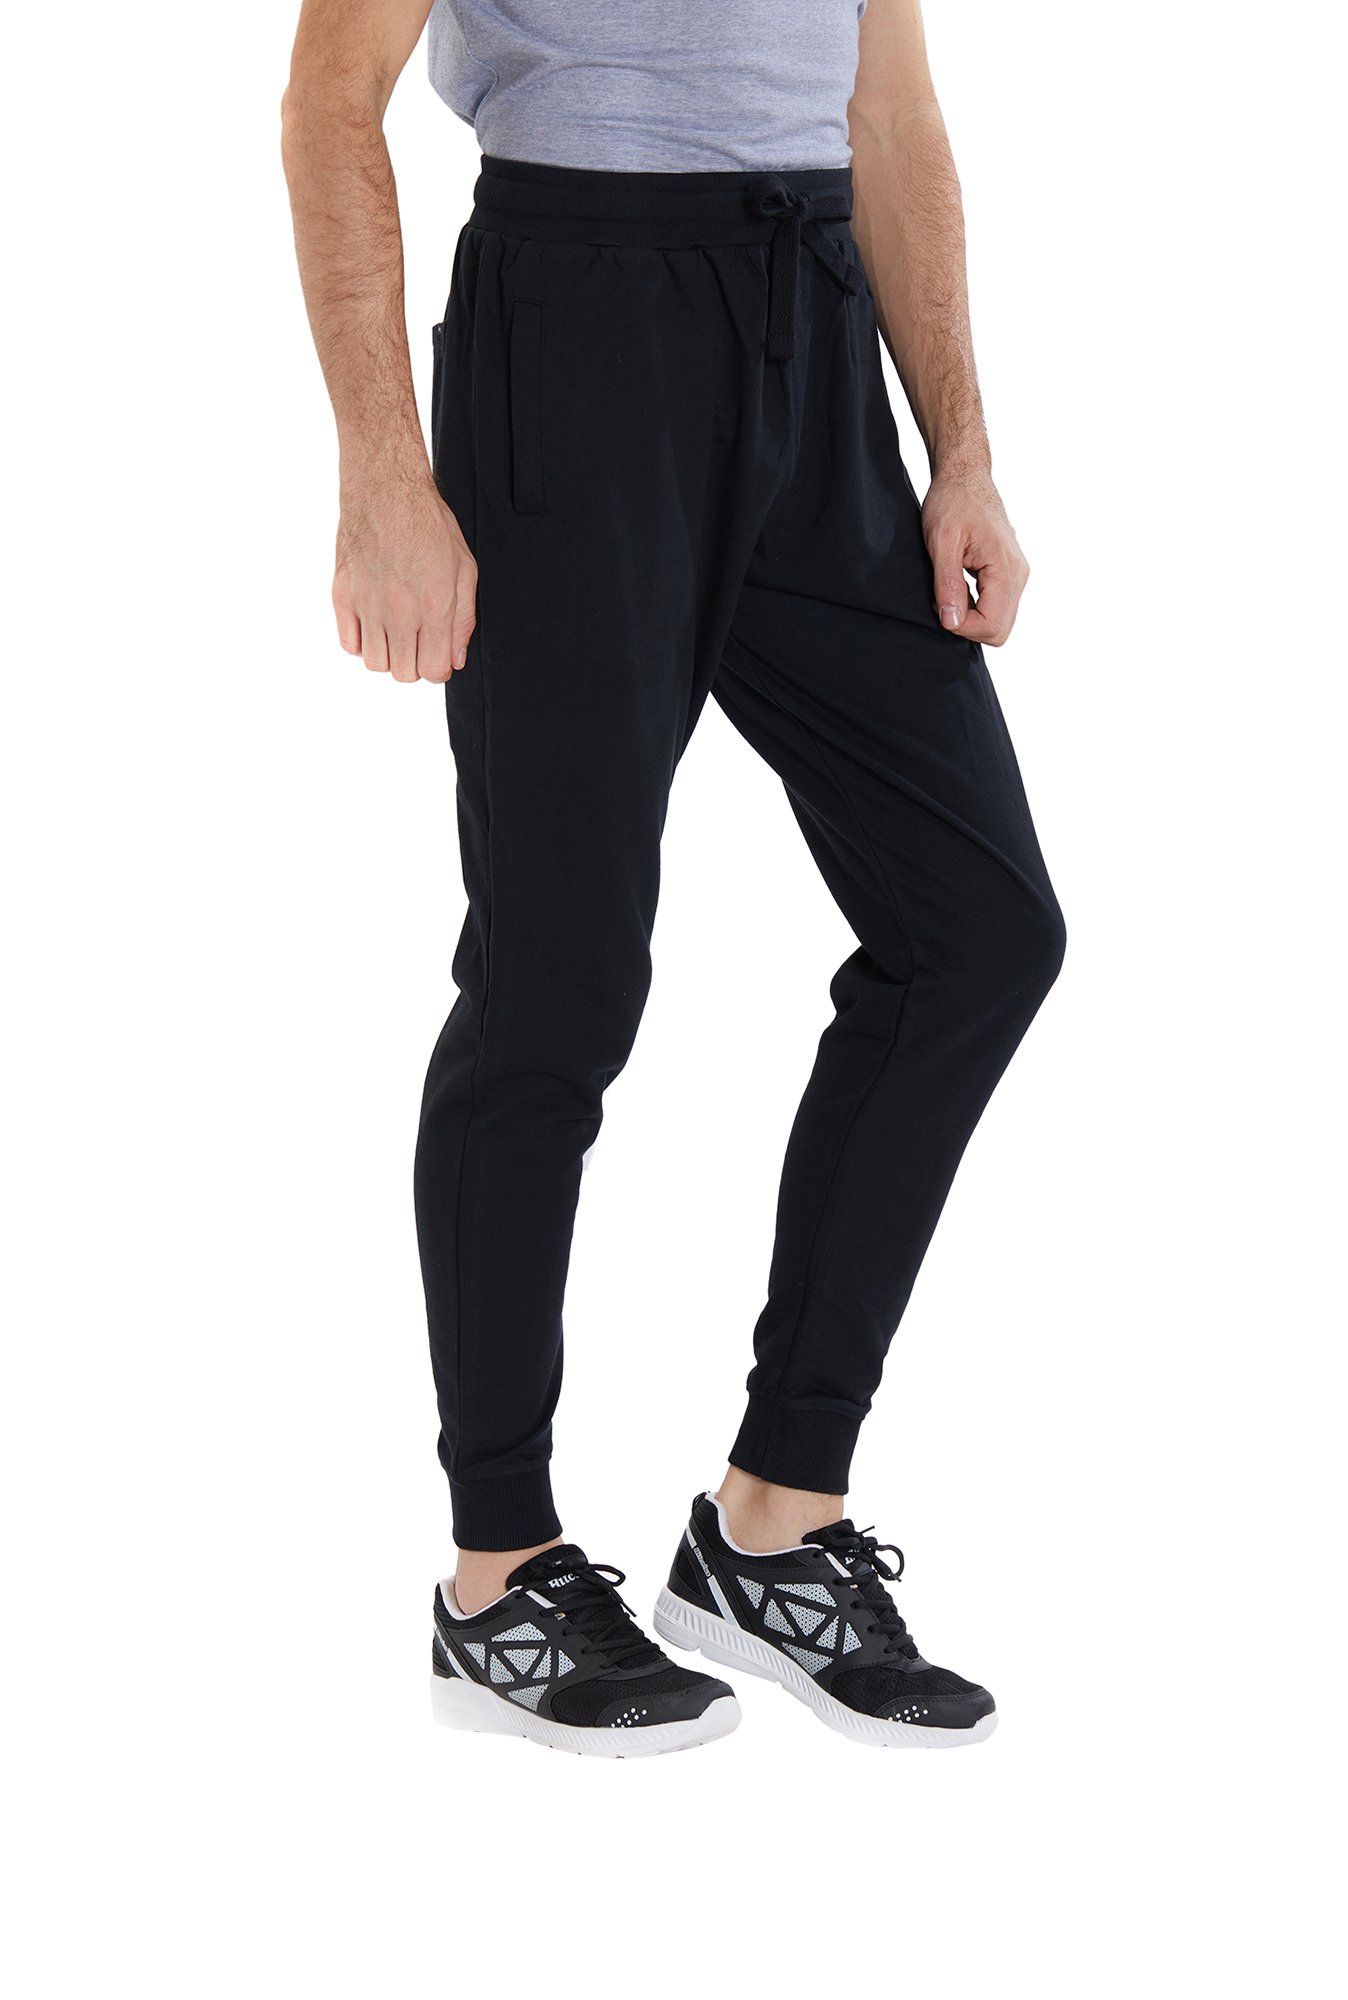 Lawman Pg 3 Trousers - Buy Lawman Pg 3 Trousers online in India